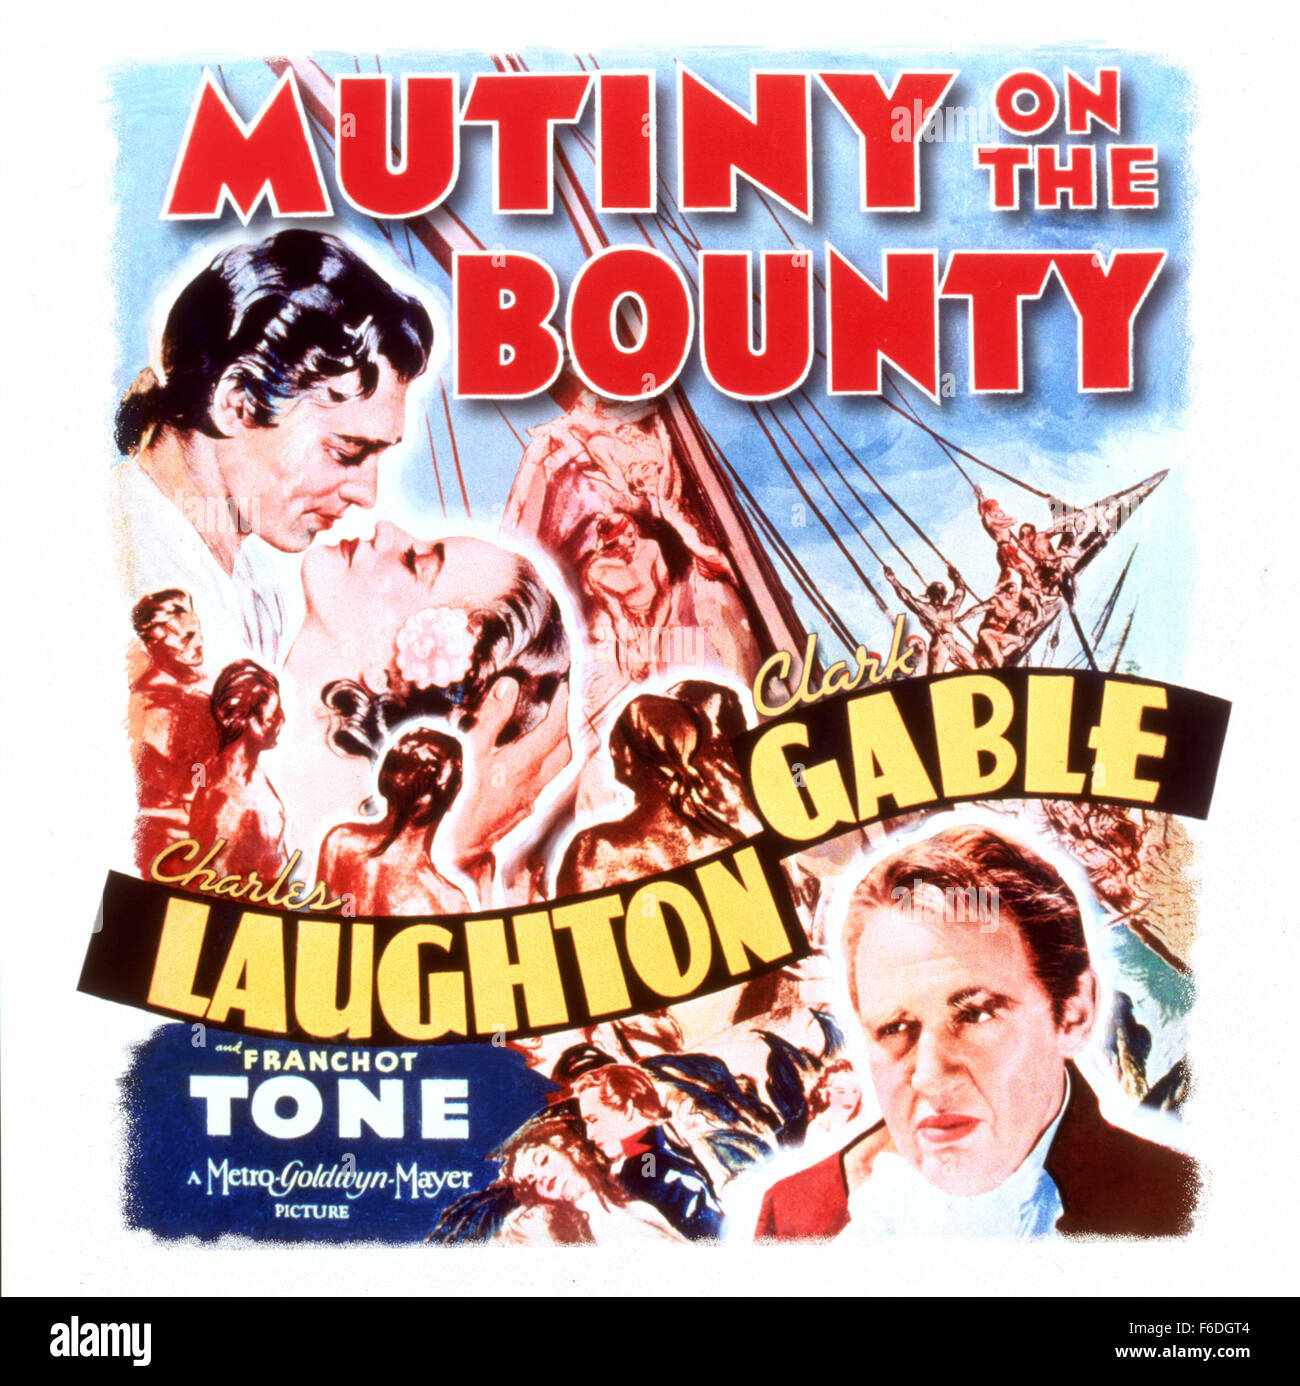 RELEASE DATE: November 22, 1935. MOVIE TITLE: Mutiny on the Bounty. STUDIO: Metro-Goldwyn-Mayer (MGM). PLOT: Midshipman Roger Byam joins Captain Bligh and Fletcher Christian aboard the HMS Bounty for a voyage to Tahiti. Bligh proves to be a brutal tyrant and, after six pleasant months on Tahiti, Christian leads the crew to mutiny on the homeward voyage. Even though Byam takes no part in the mutiny, he must defend himself against charges that he supported Christian. PICTURED: CHARLES LAUGHTON as Bligh and CLARK GABLE as Christian. Stock Photo